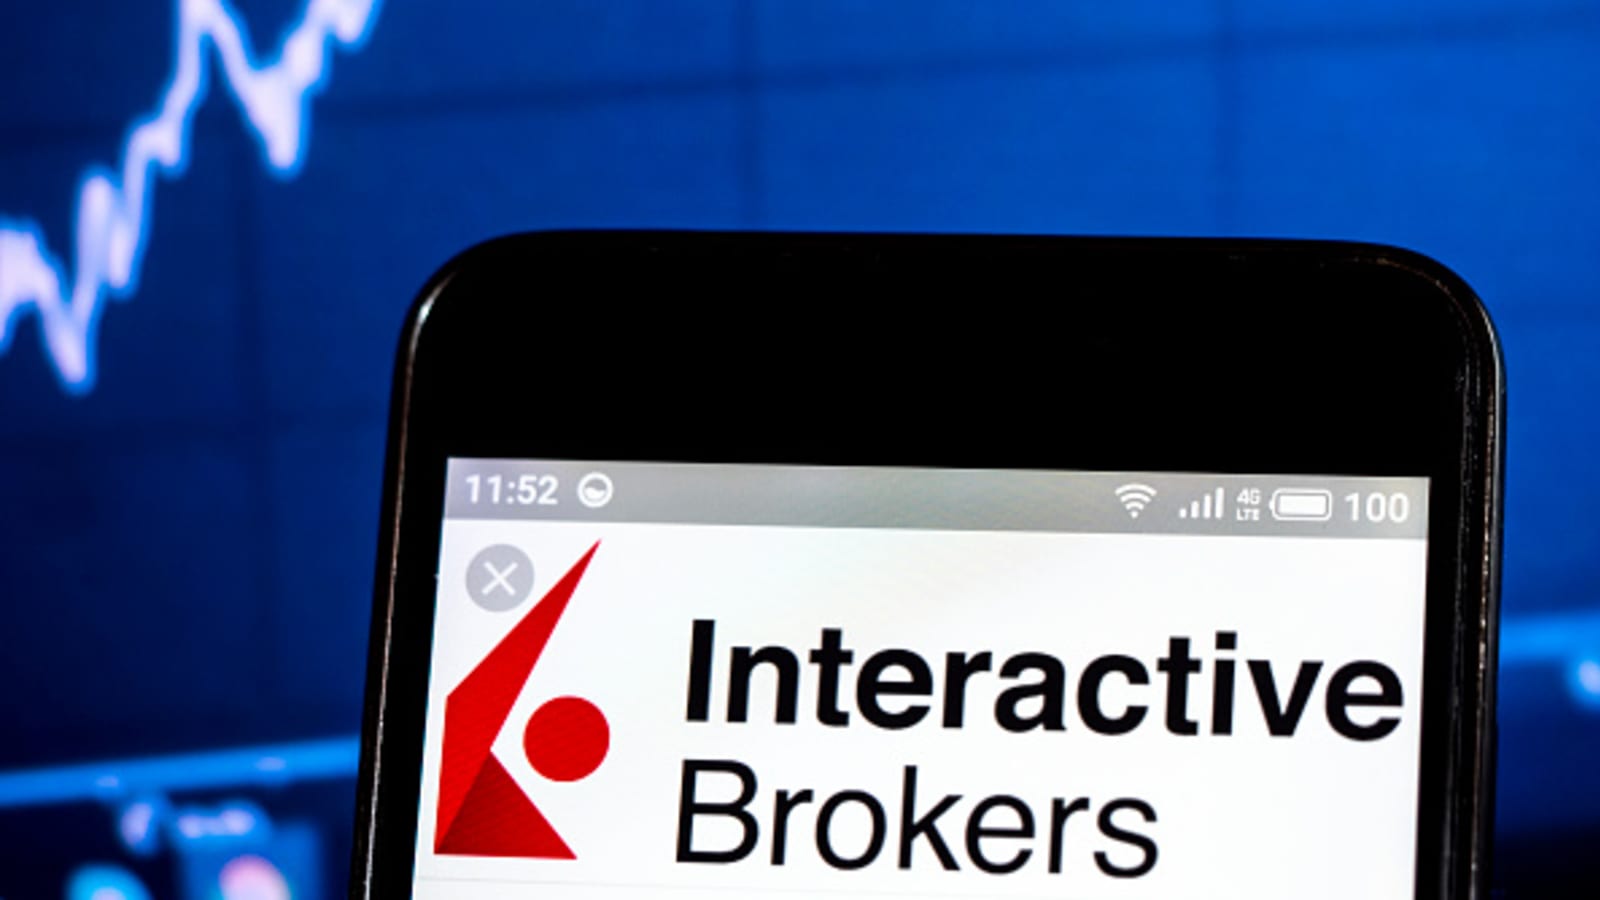 interactive brokers braces for election volatility by telling clients to put up more cash